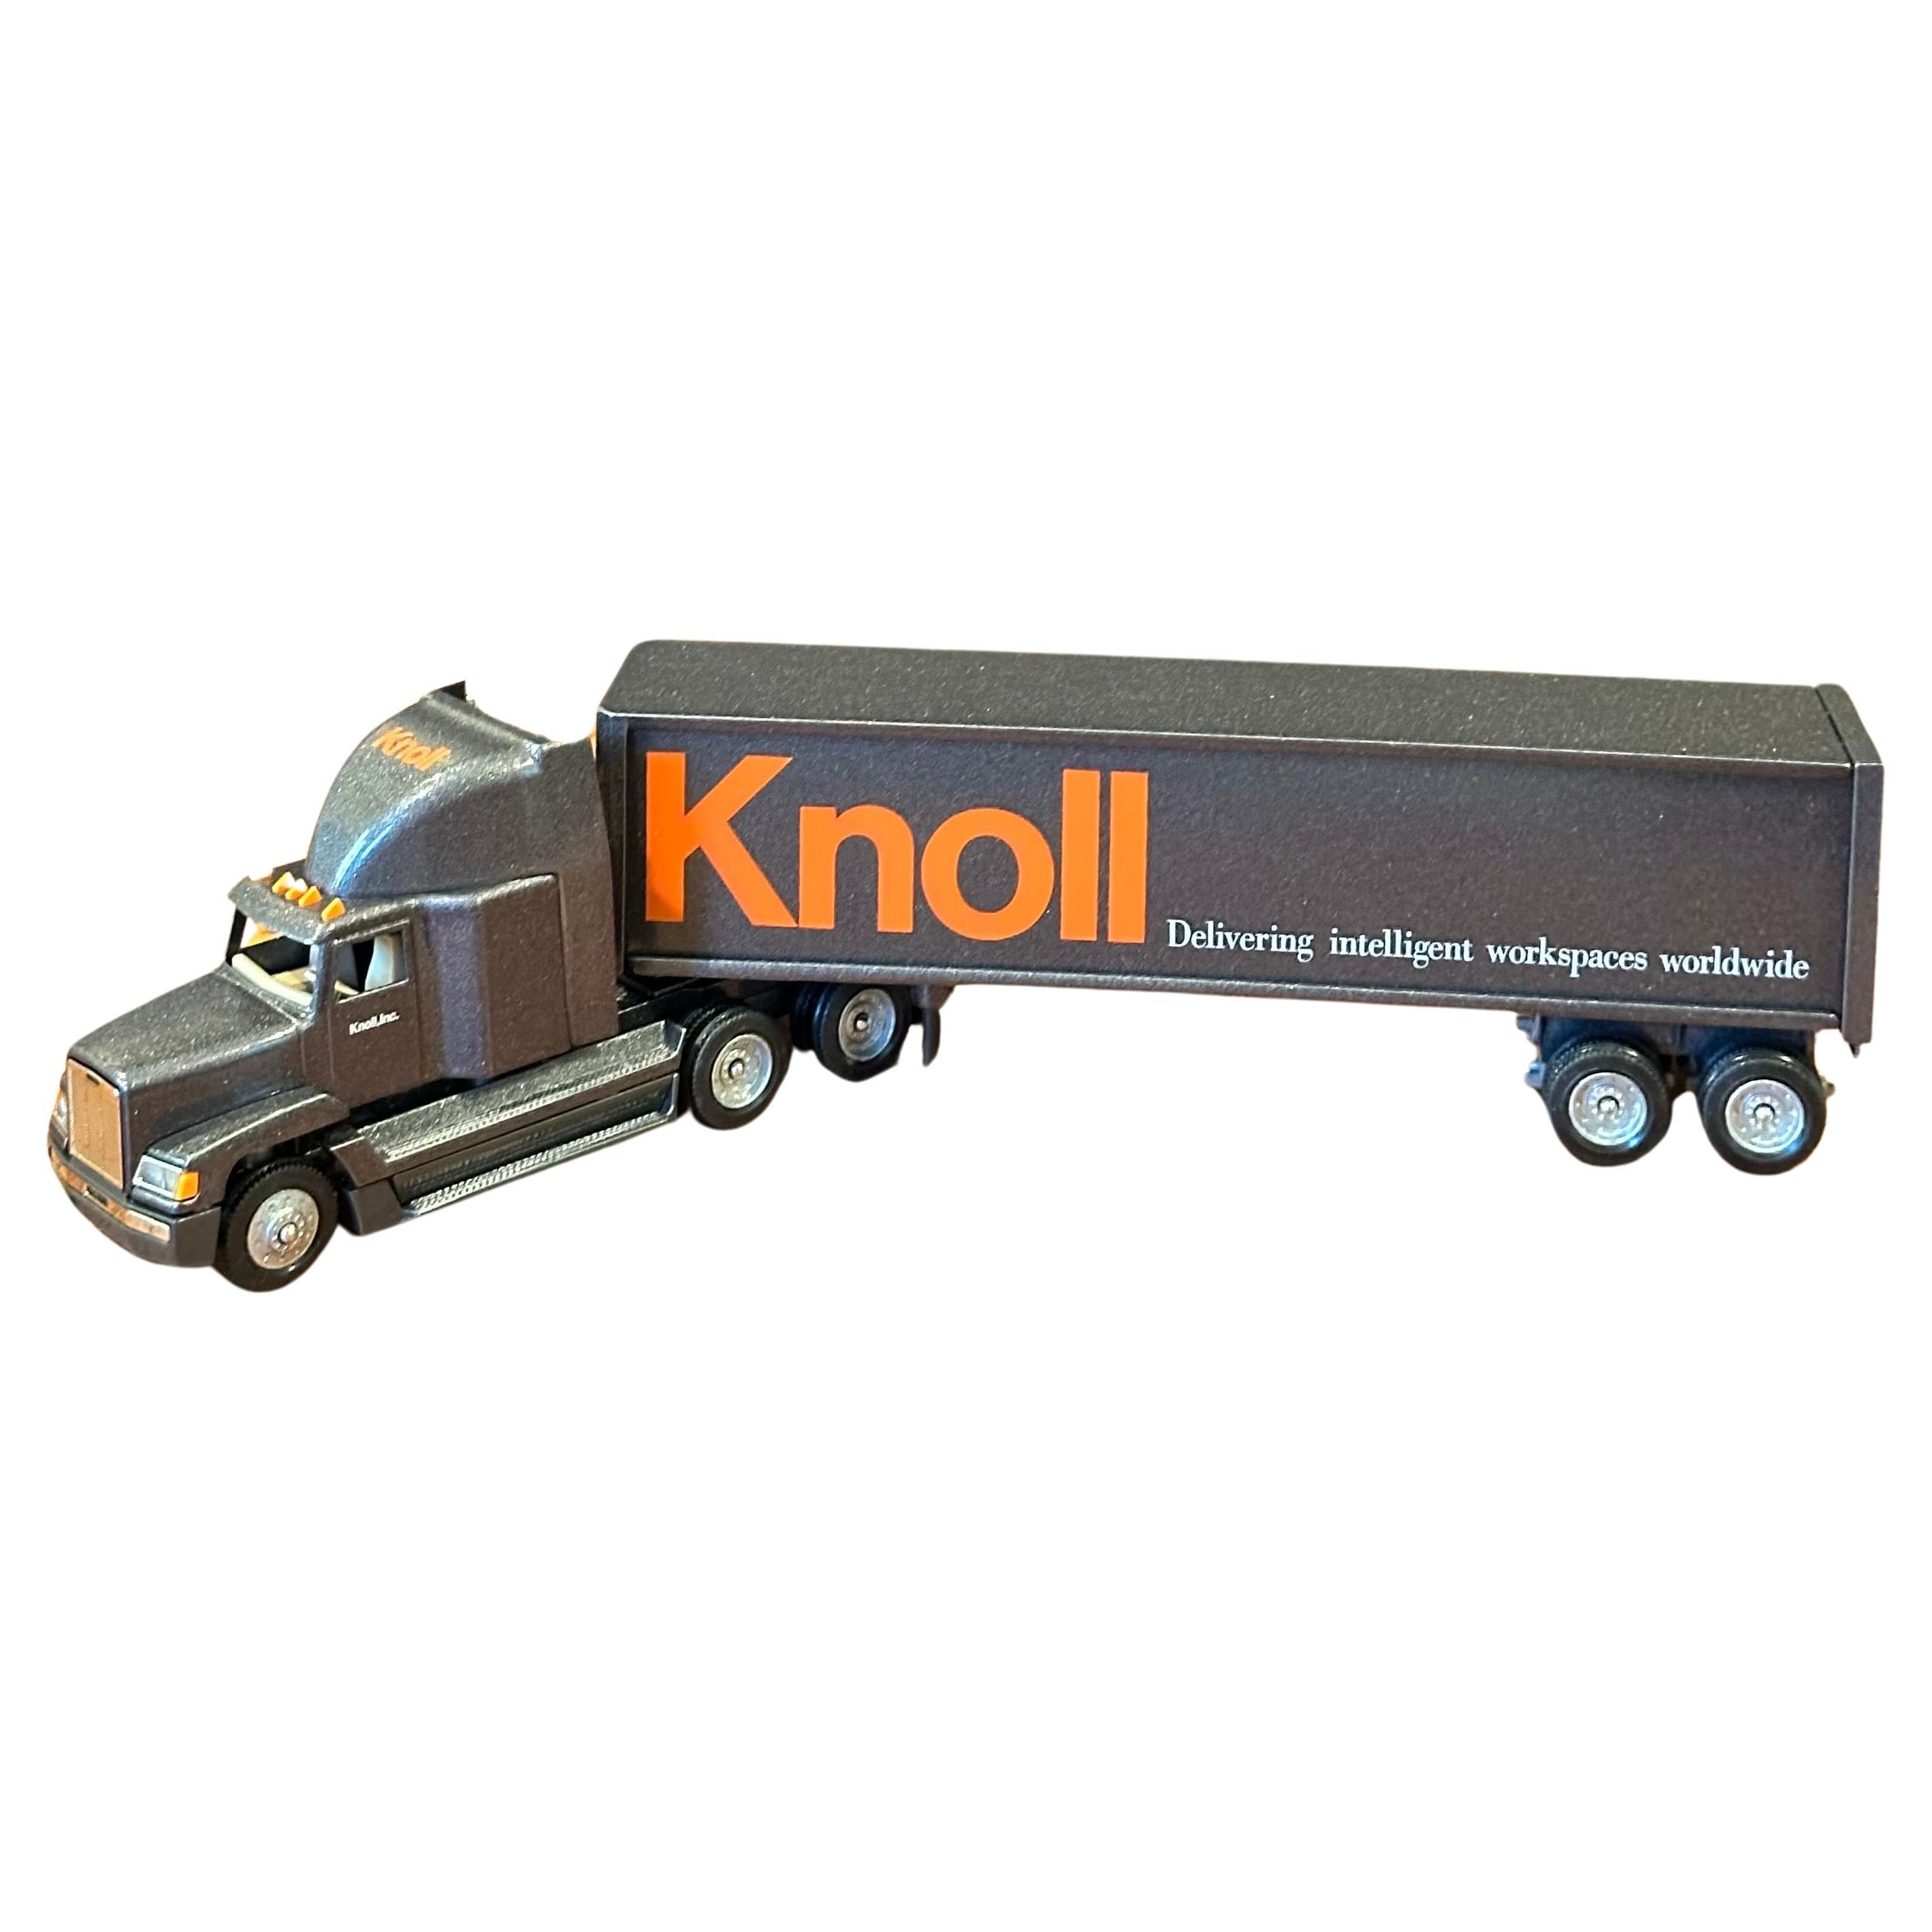 Collectible "Knoll" Tractor Trailer Truck Toy with Original Box by Winross USA For Sale